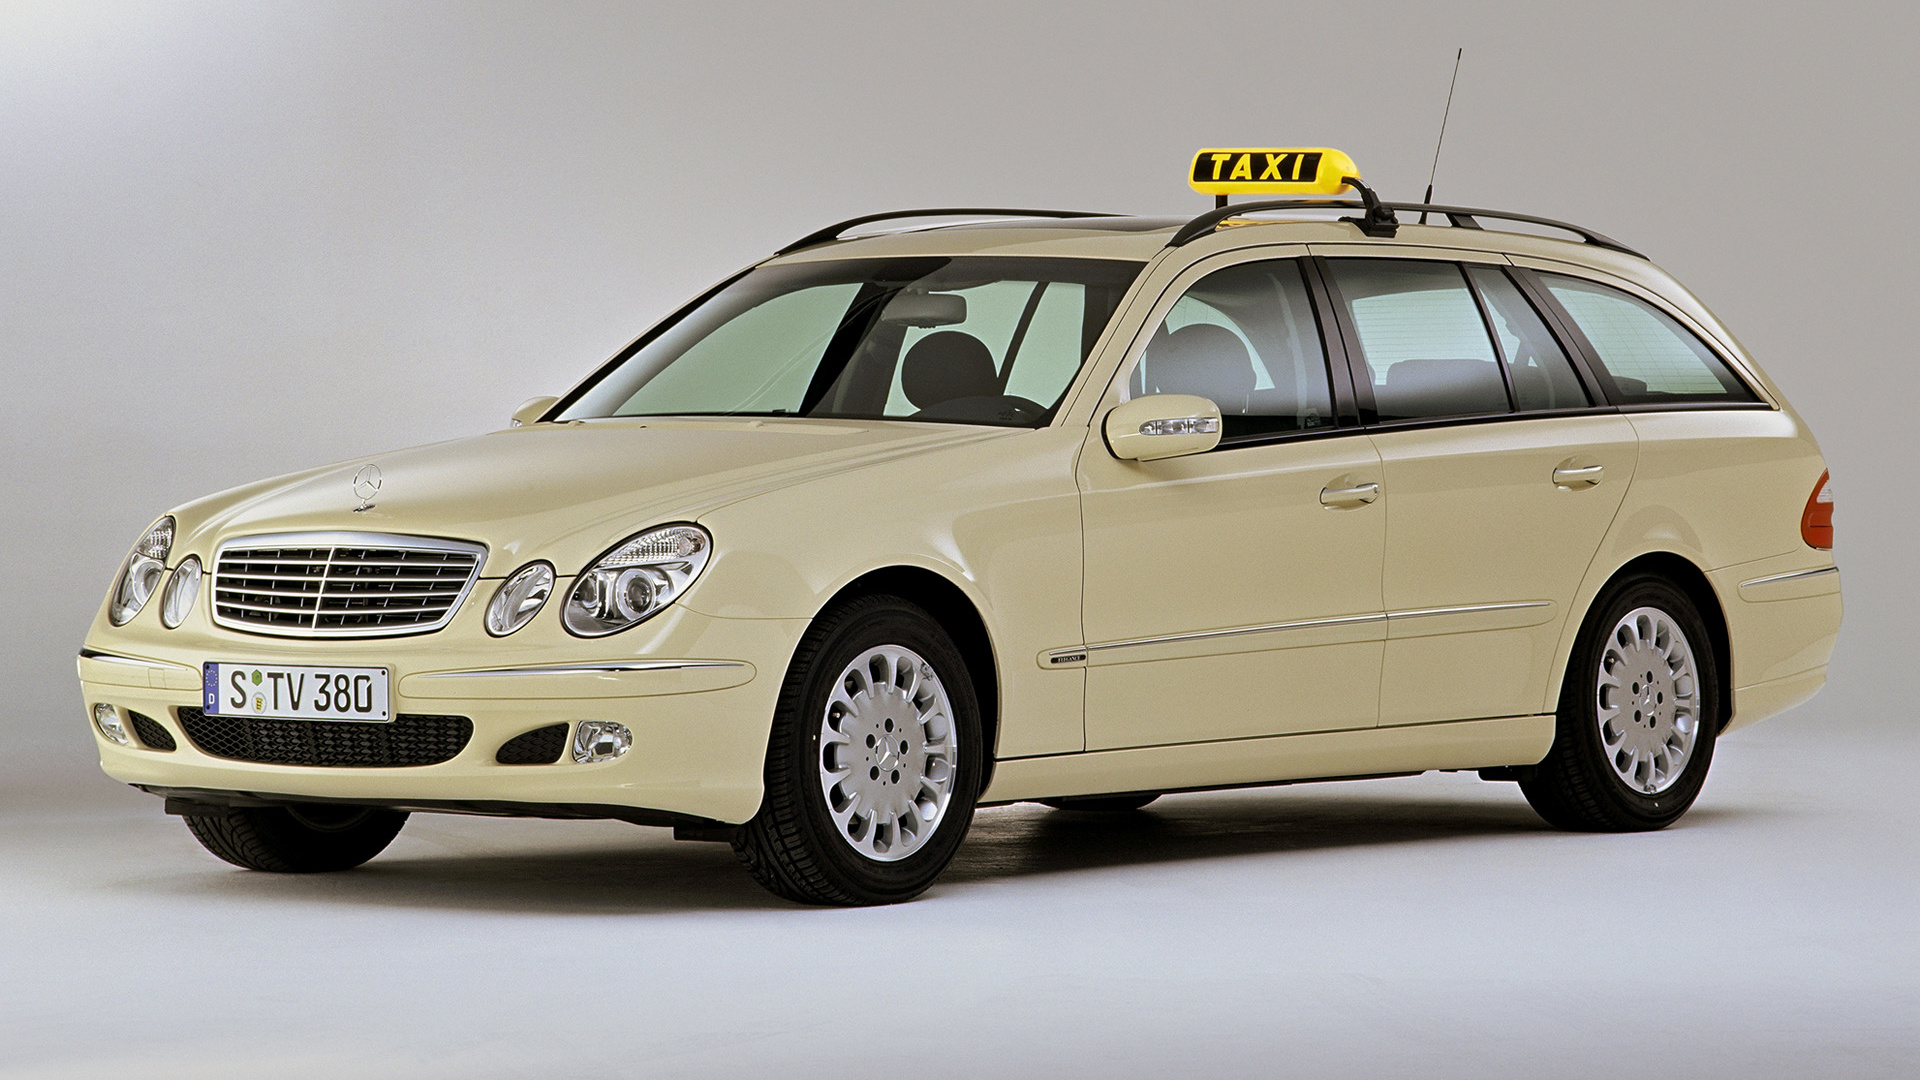 Mercedes-Benz E-Class Estate Taxi (2003) Wallpapers and HD ...